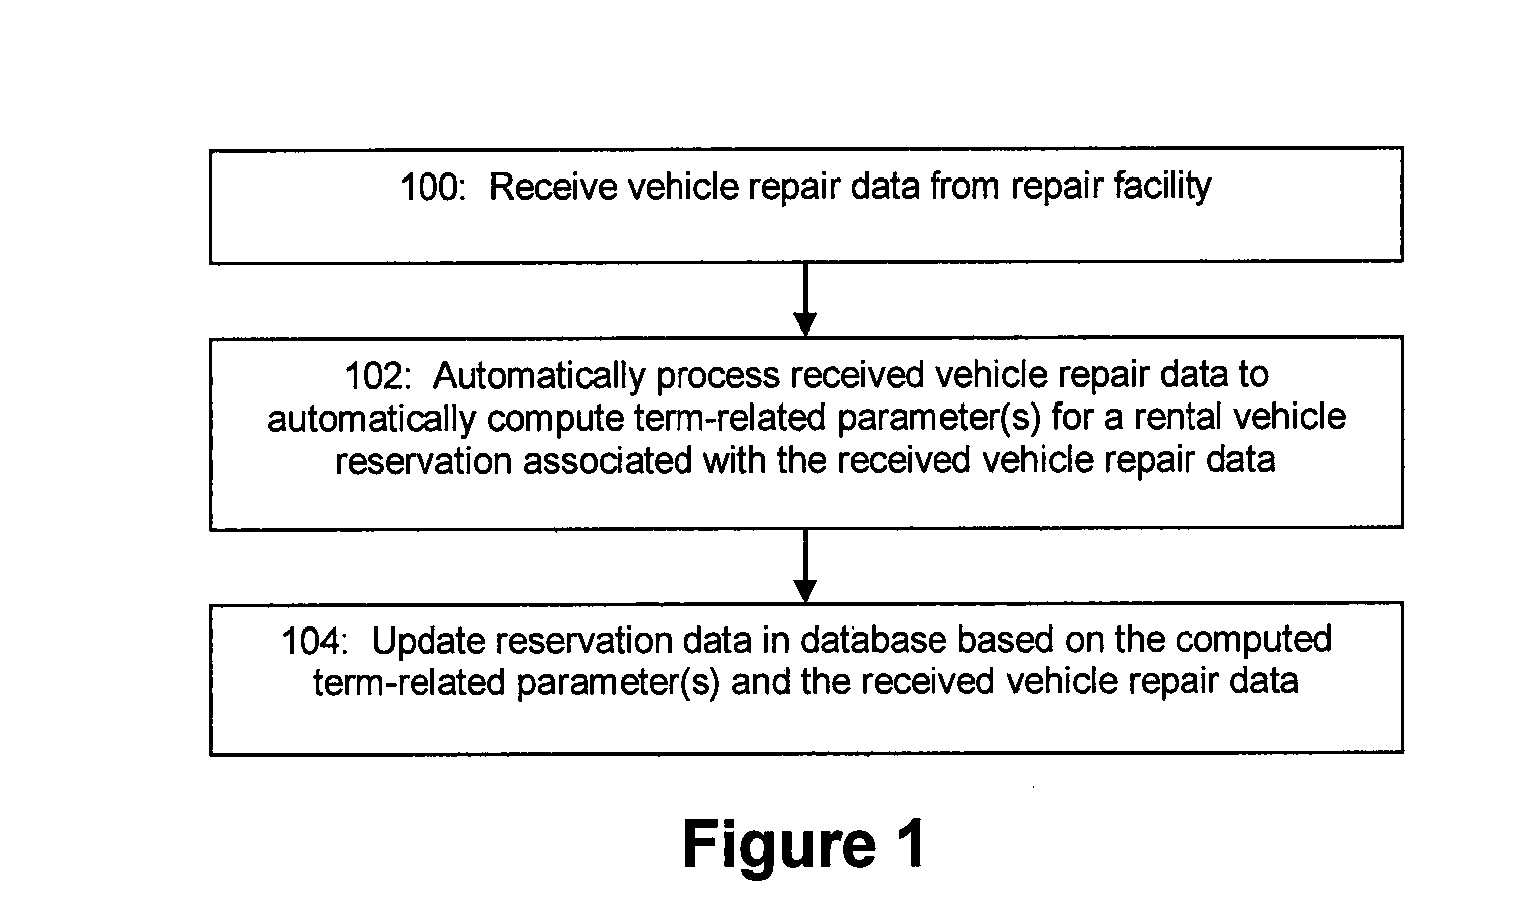 System and Method for Improved Information Sharing by Repair Facilities for Managing Rental Vehicle Reservations